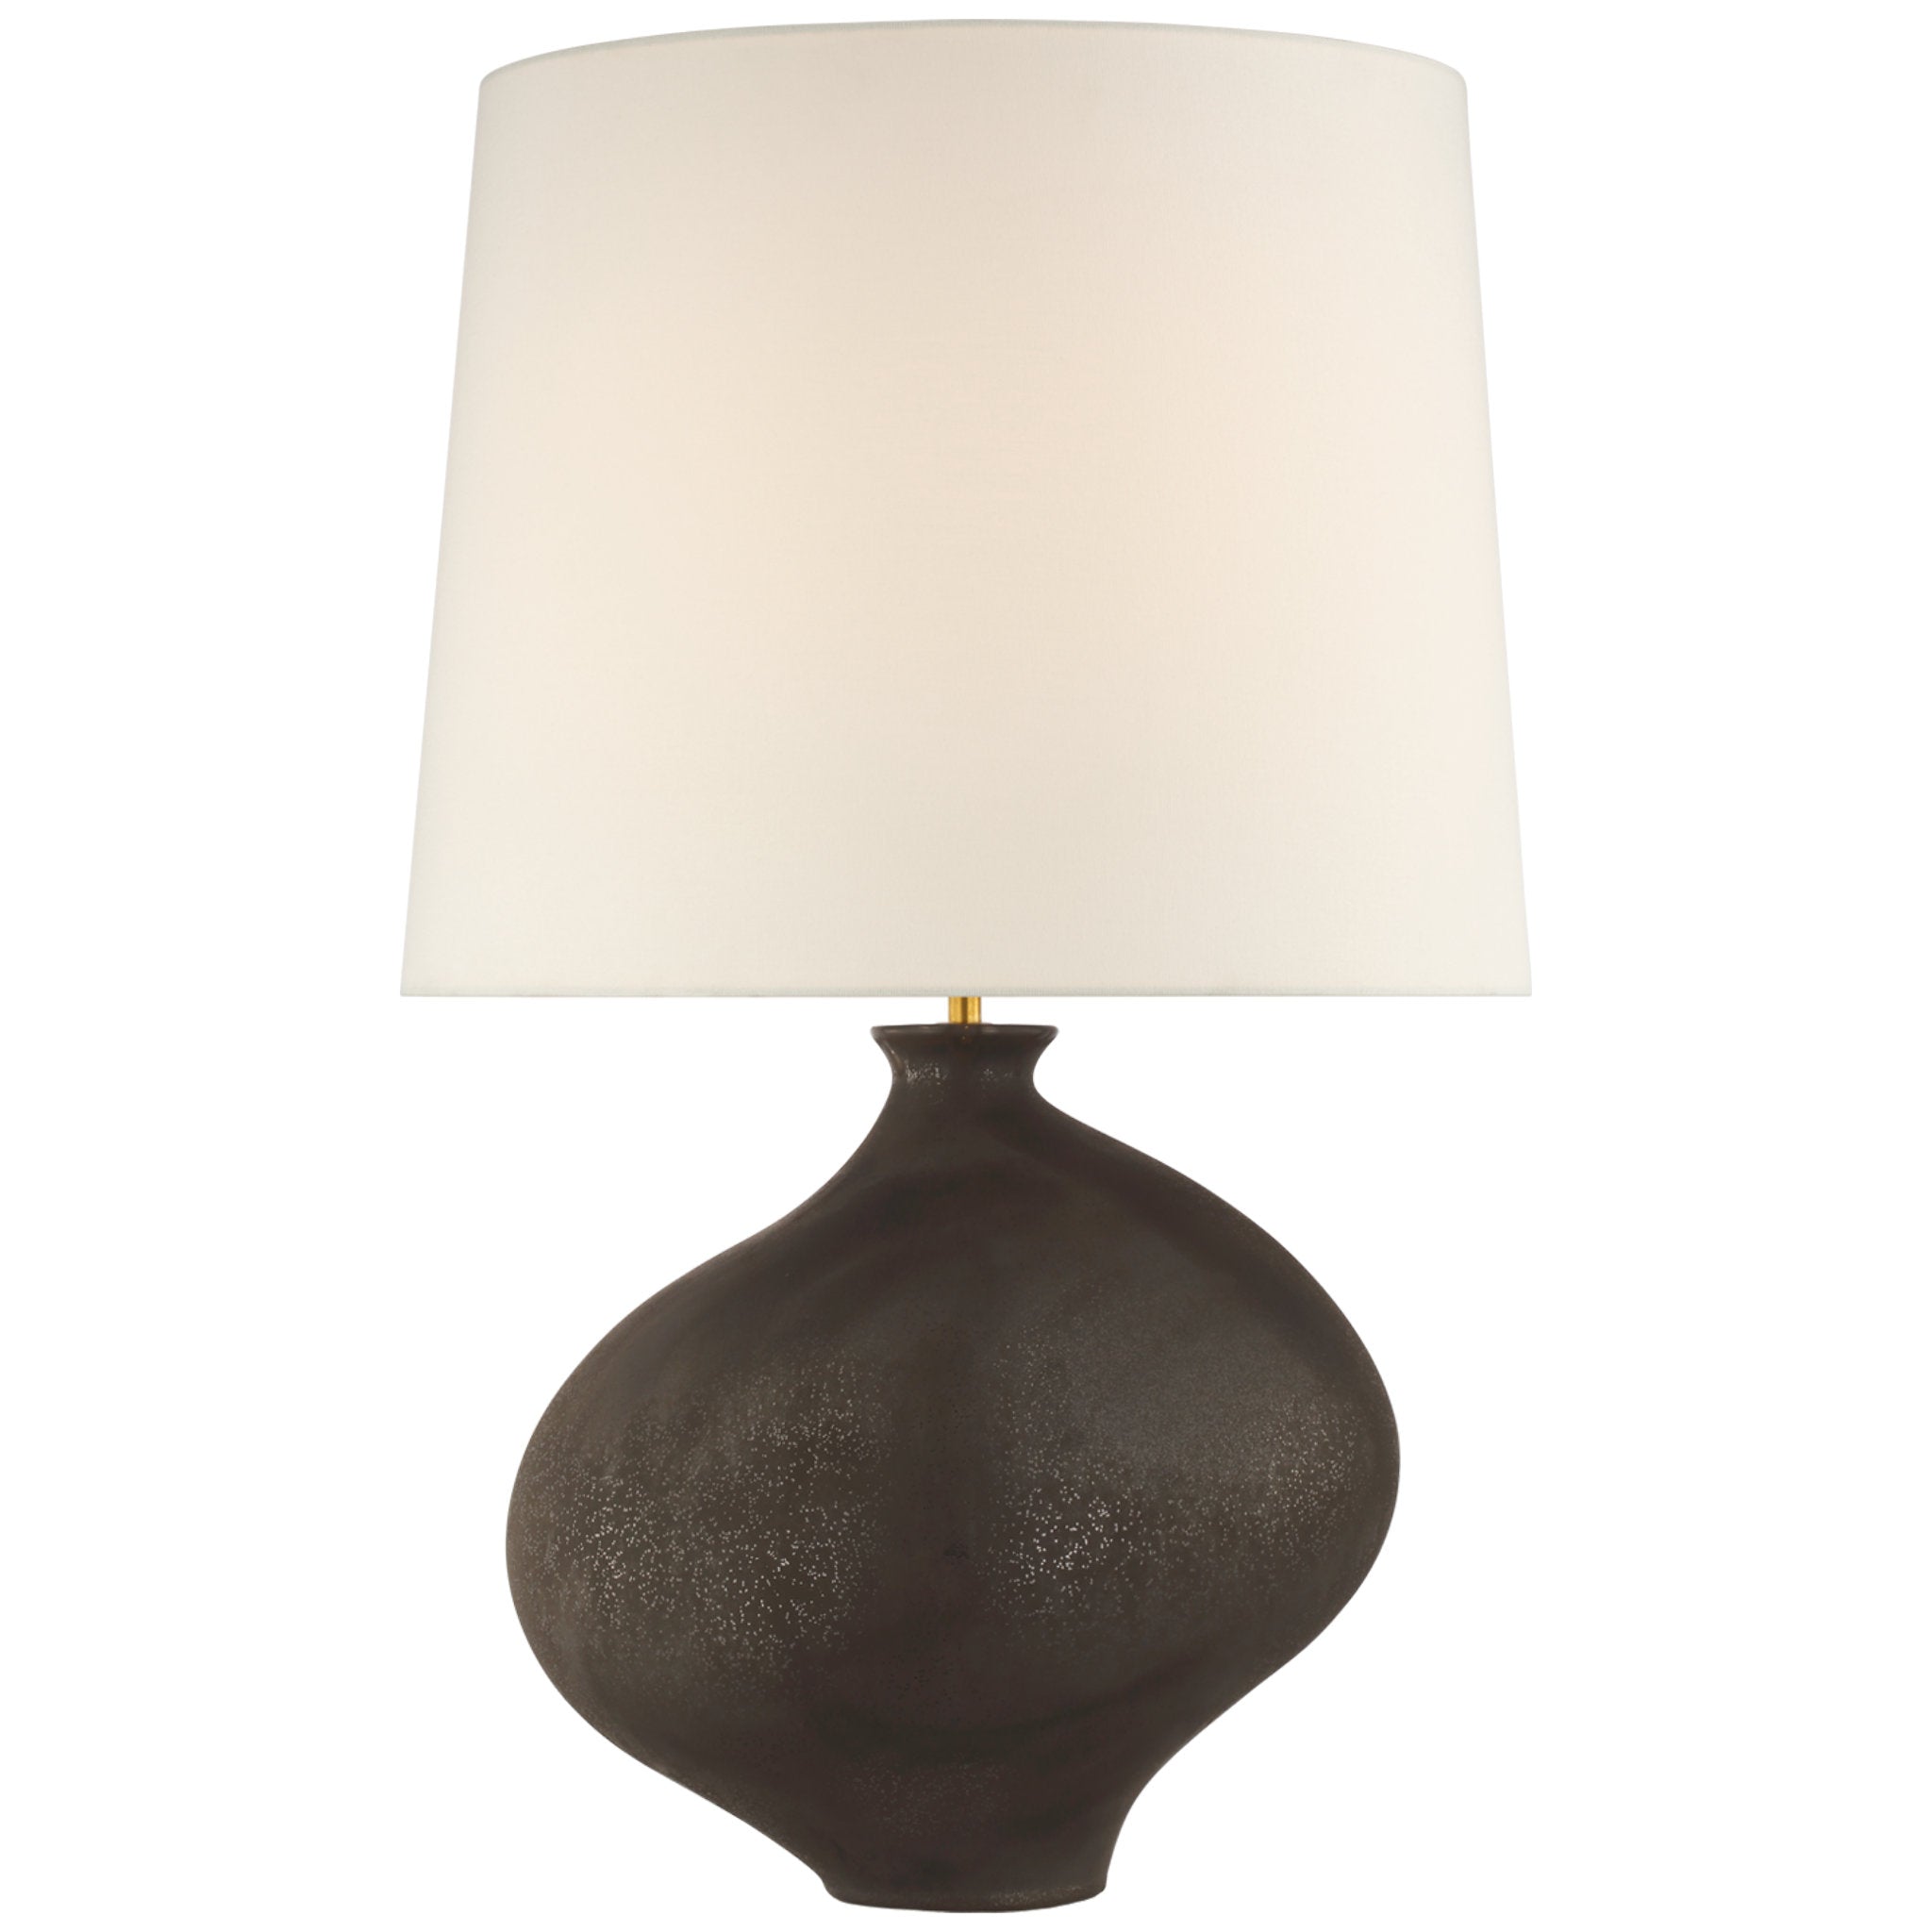 AERIN Celia Large Right Table Lamp in Stained Black Metallic with Linen Shade